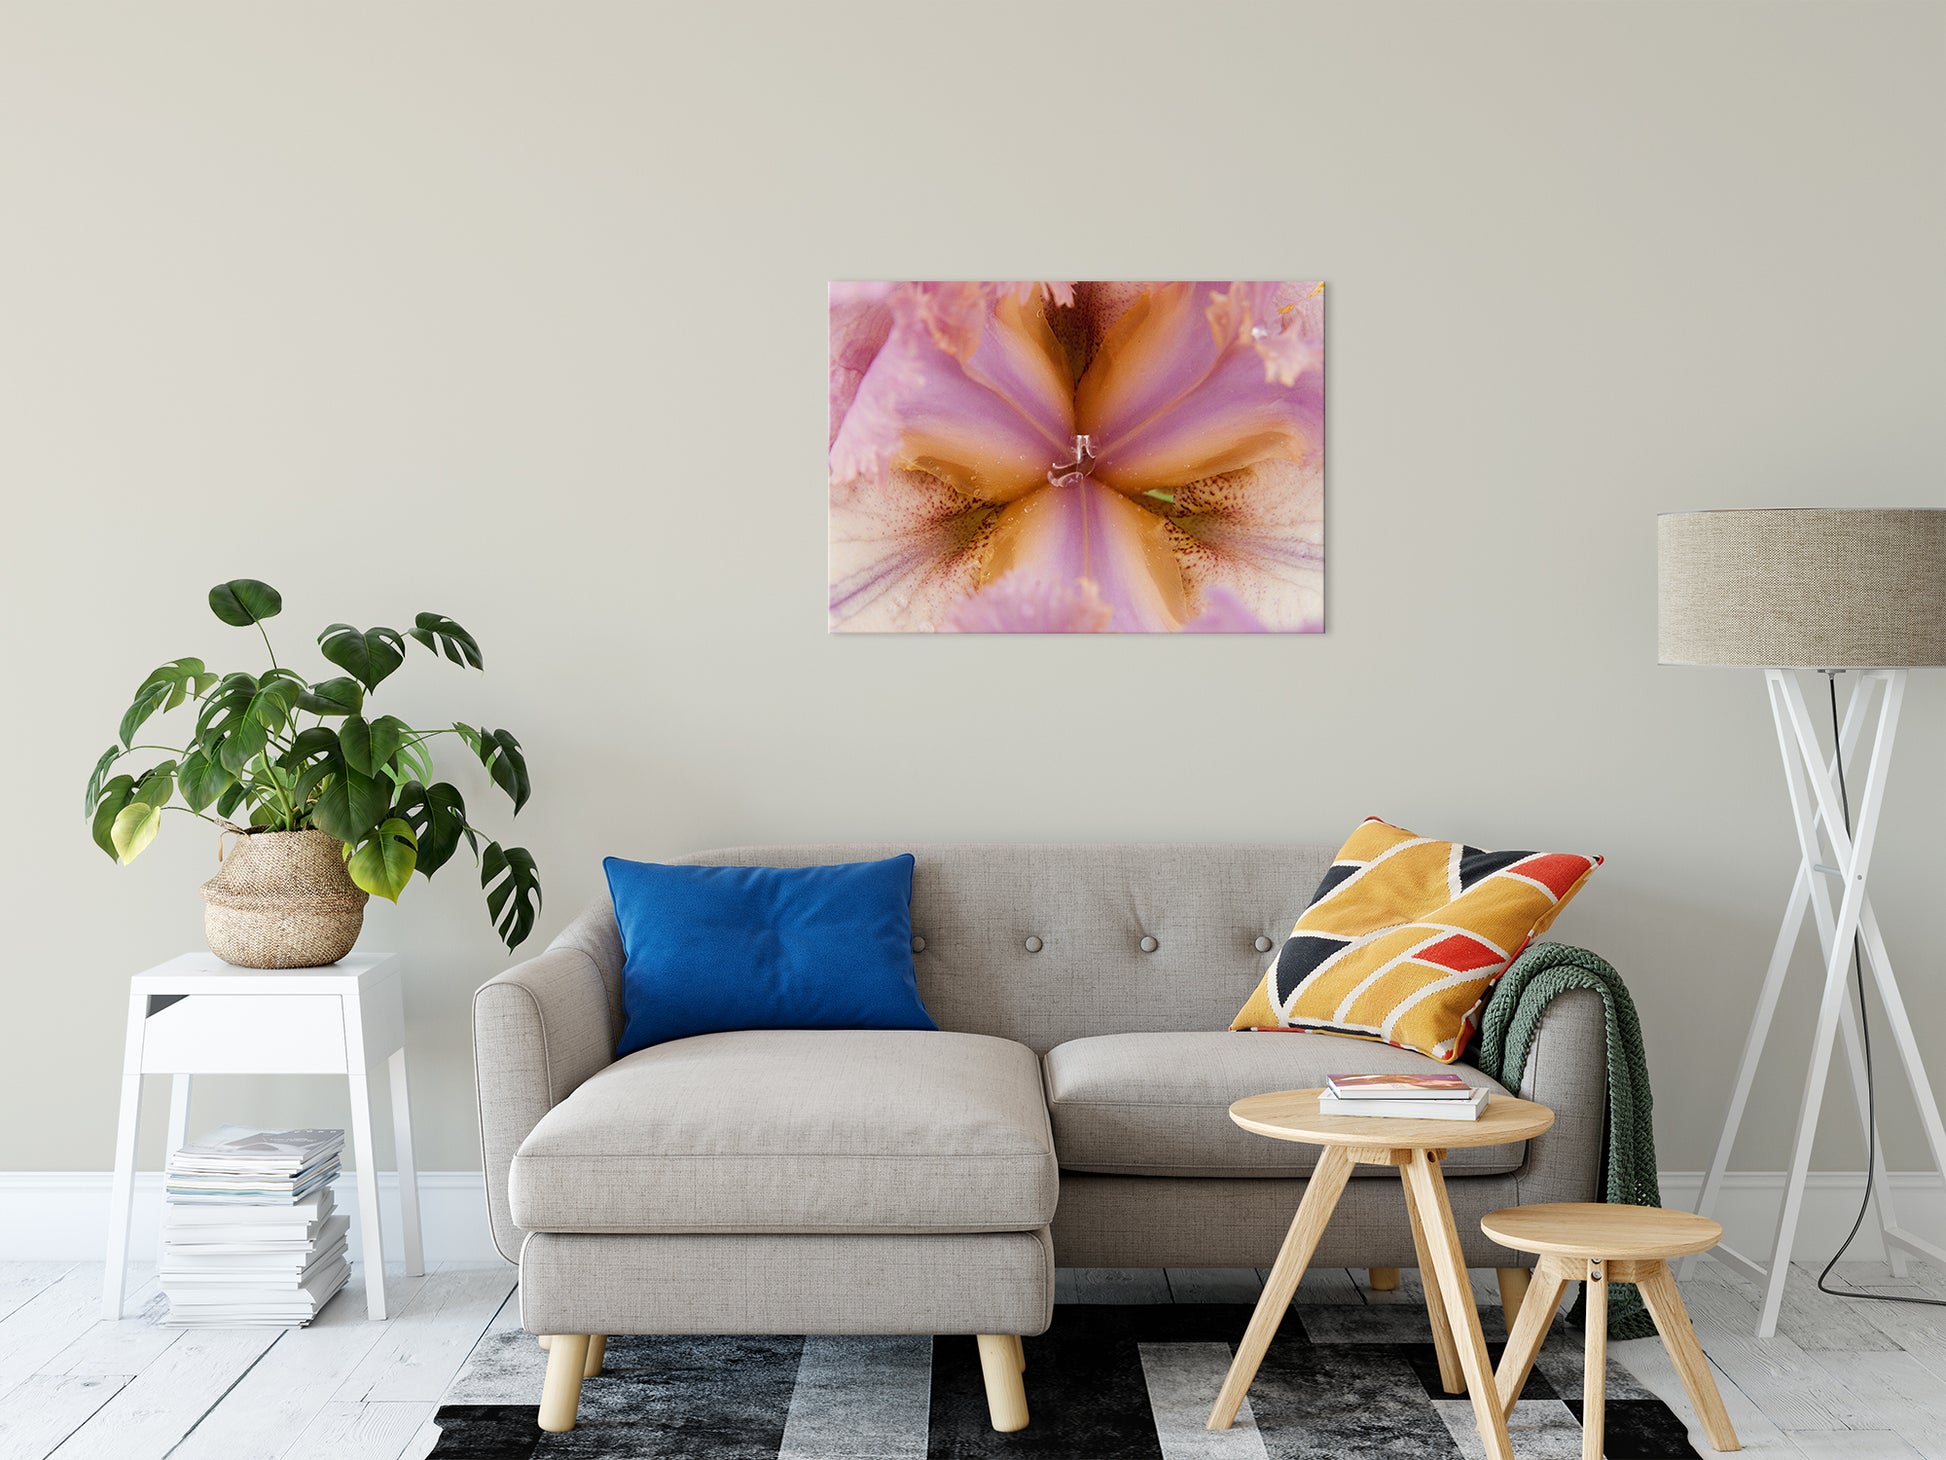 Symmetry of Nature Nature / Floral Photo Fine Art Canvas Wall Art Prints 24" x 36" - PIPAFINEART